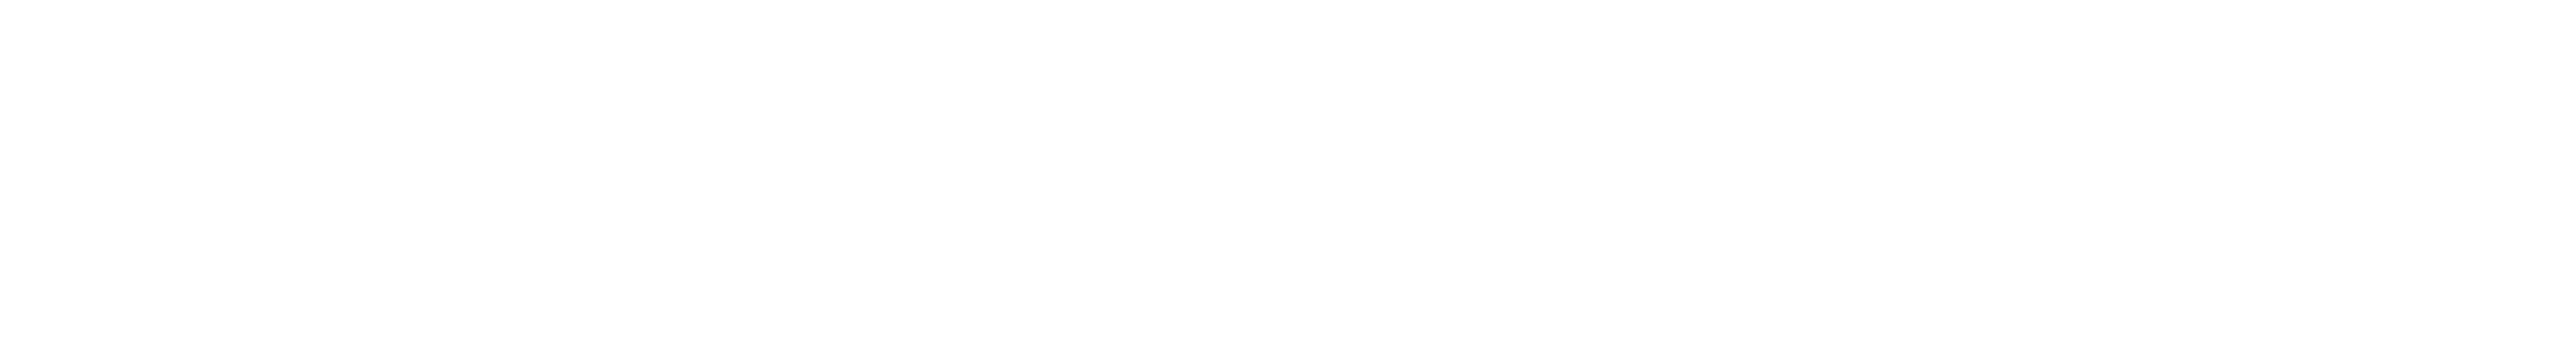 Gone with the Wind logo